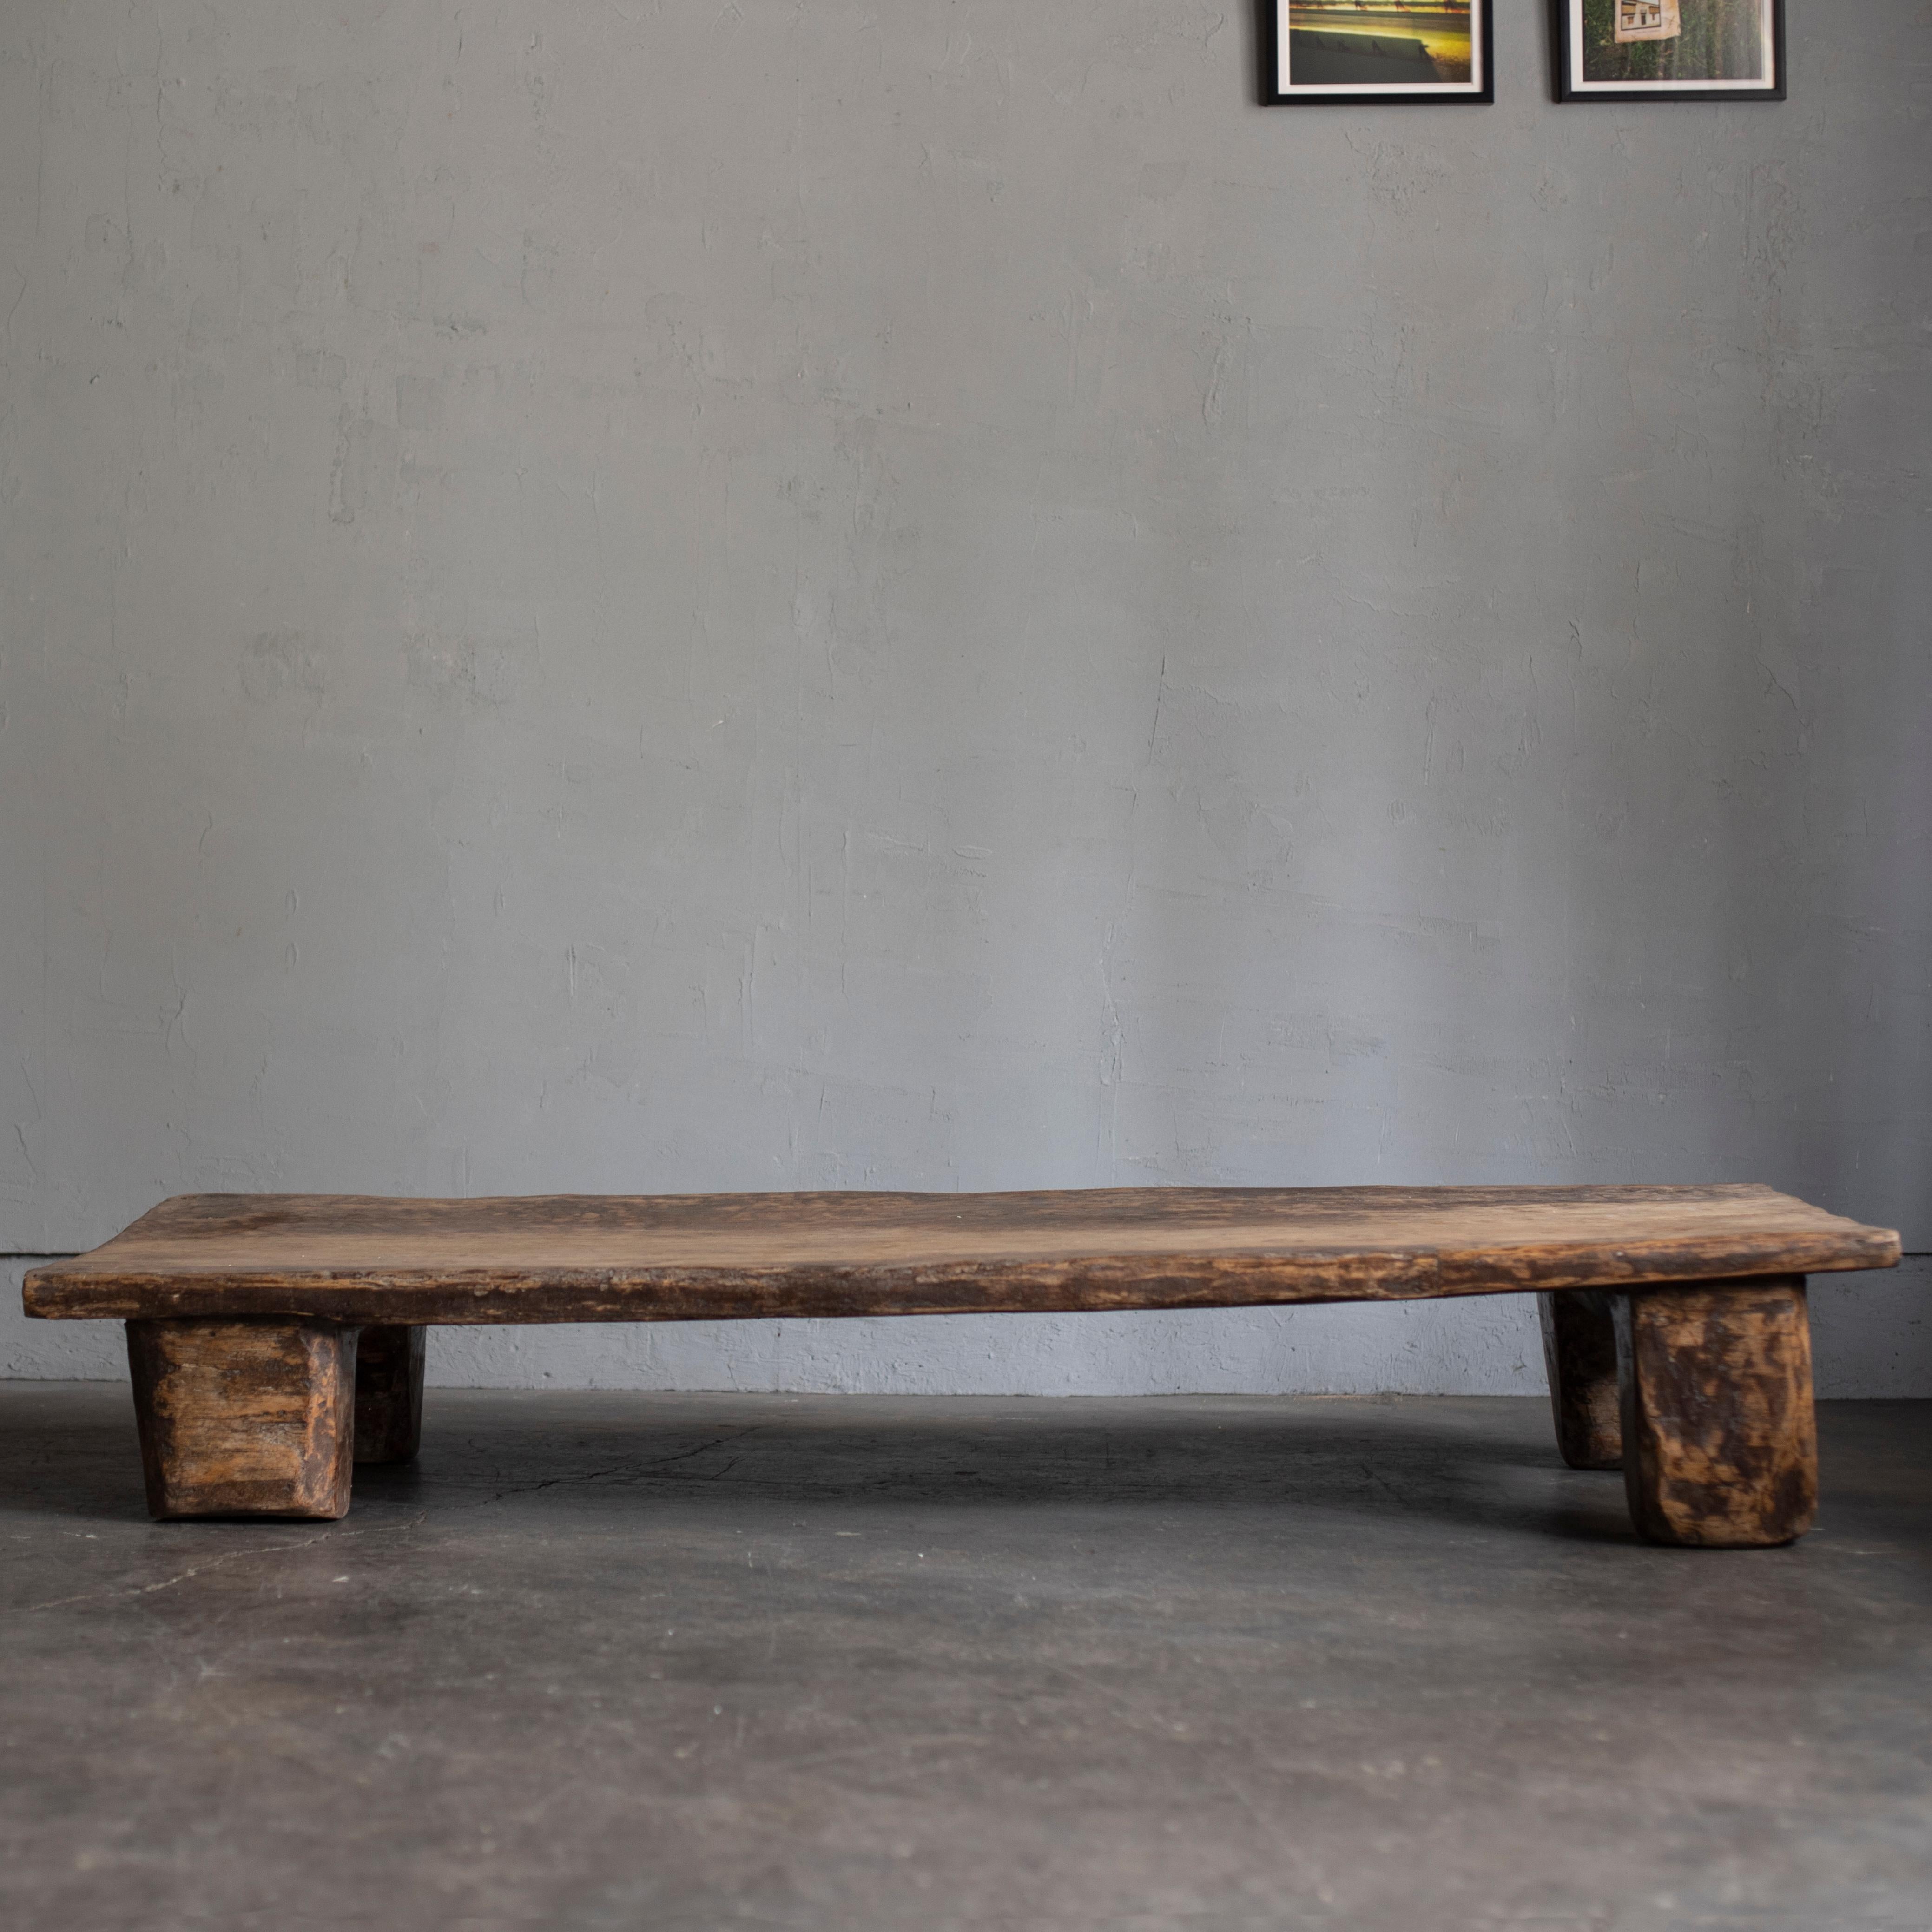 Primitive Naga coffee table. Hand carved from a single piece of wood.
Rustic and beautiful. 
Please note that the surface is not completely flat.